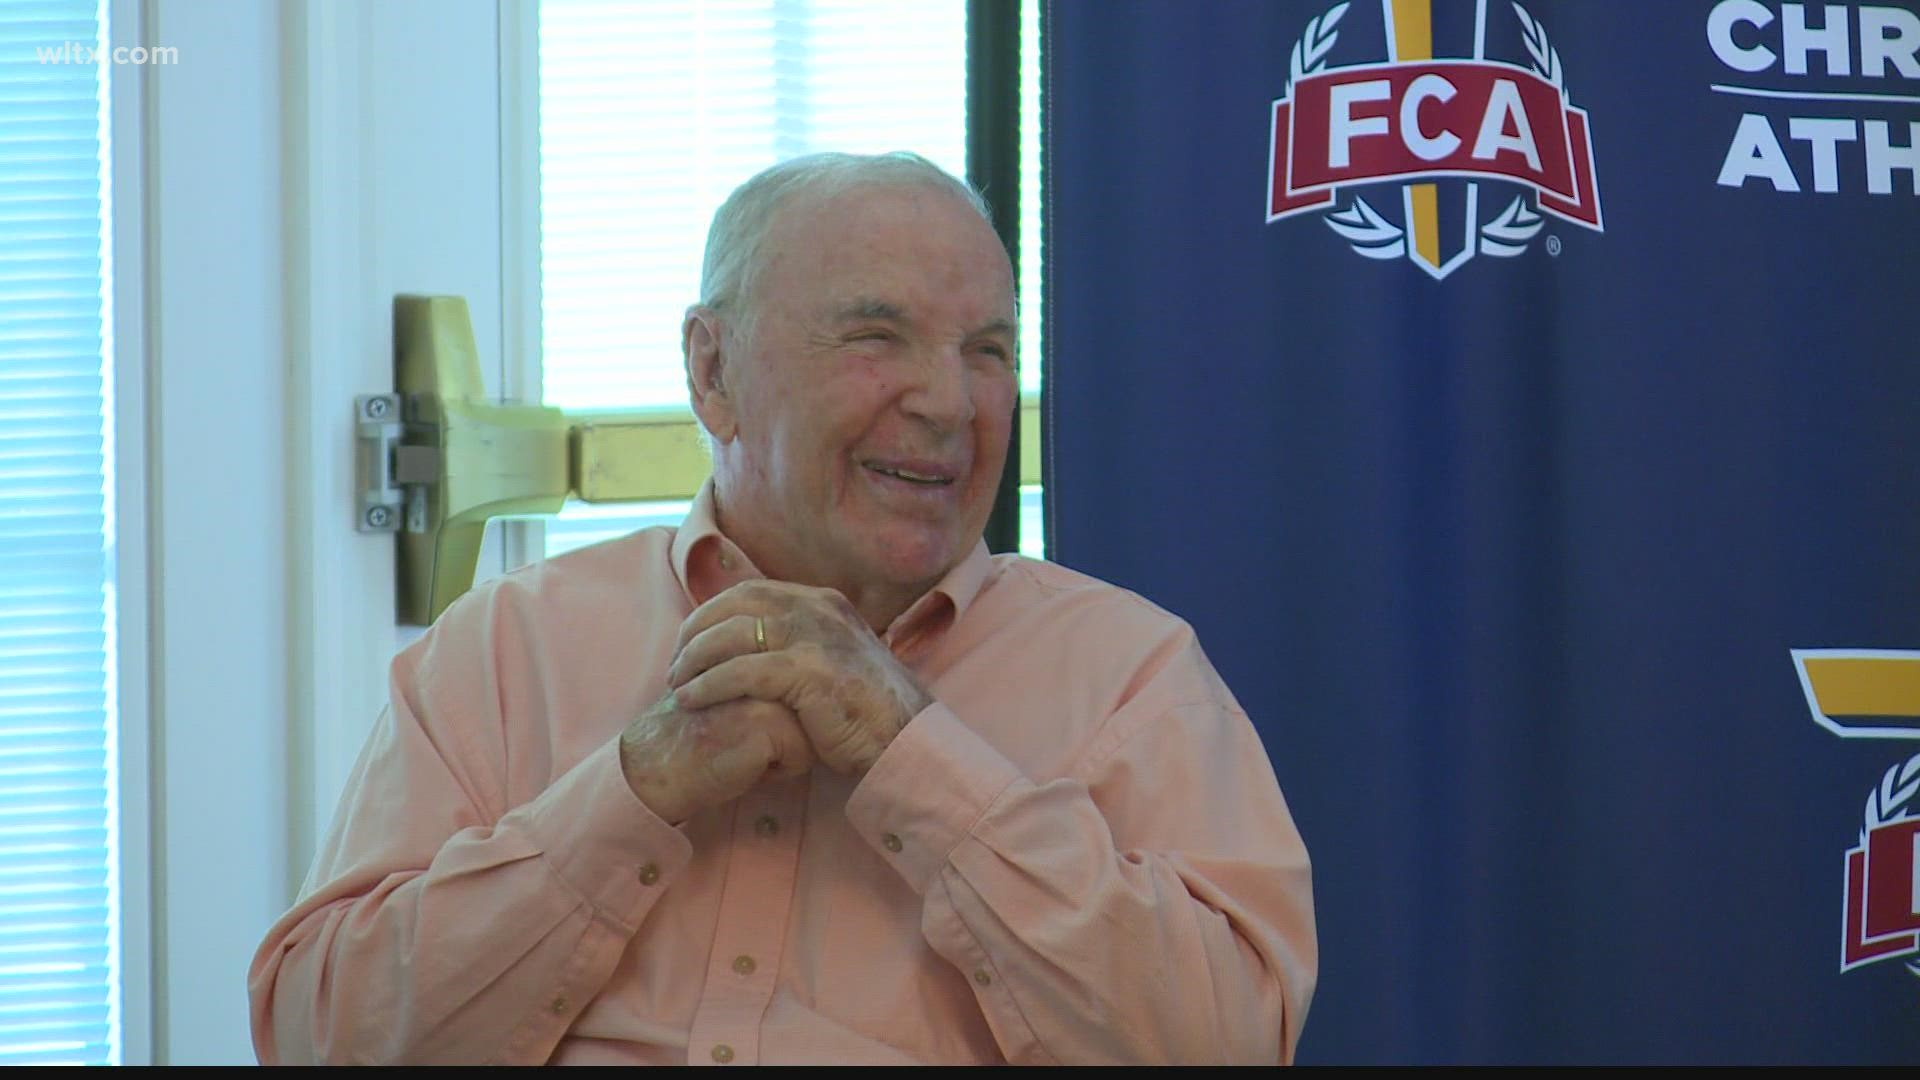 The legendary football coach Art Baker has a scholarship that has been created in his name to assist athletes who want to go to FCA camps and retreats.